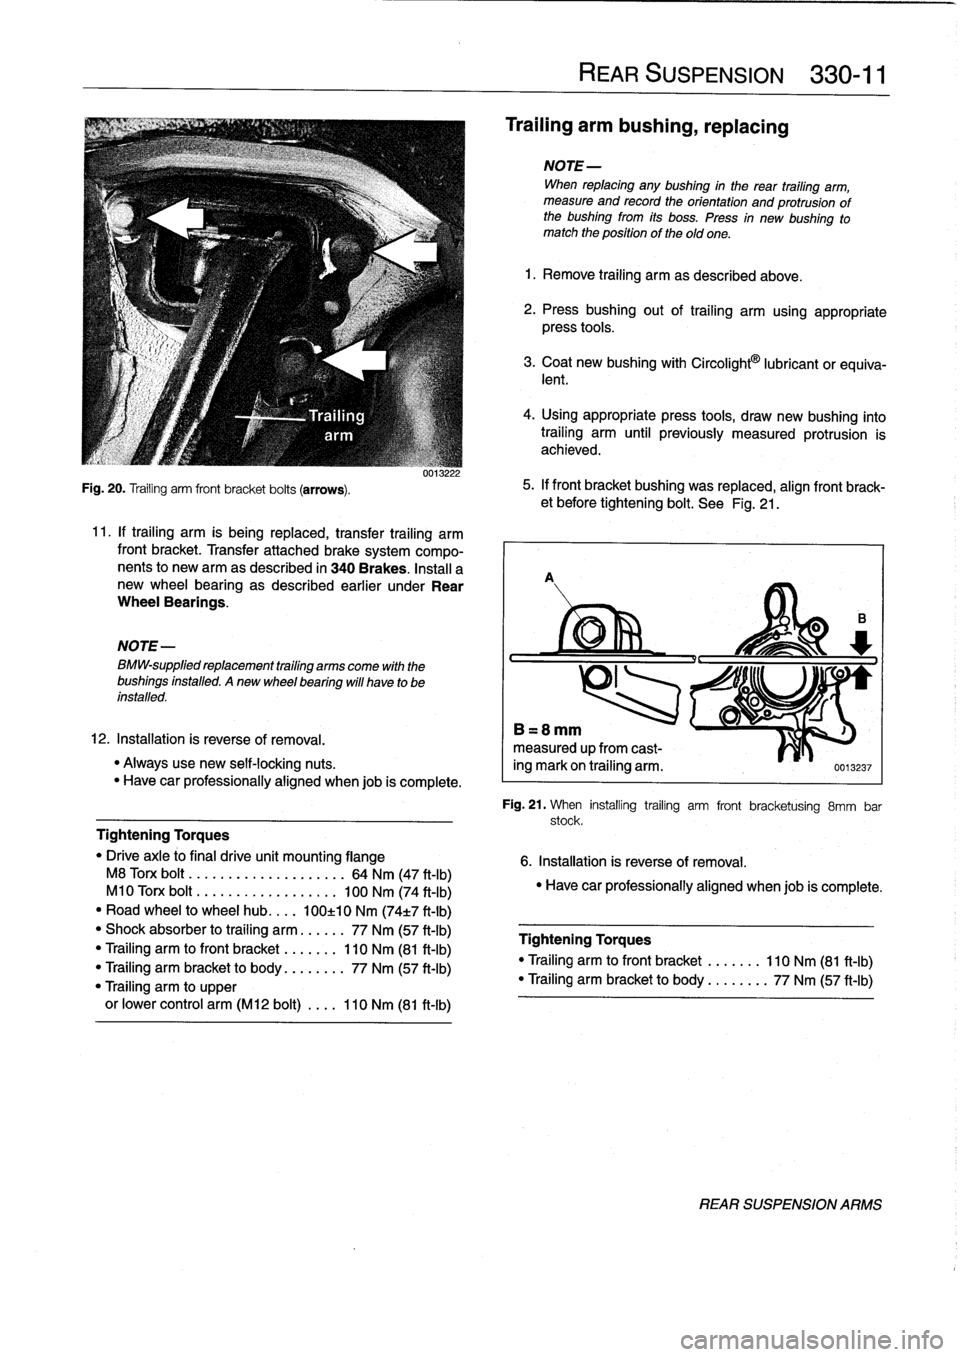 BMW 318i 1998 E36 Owners Guide 
Fig
.
20
.
Trailing
arm
front
bracket
bolts
(arrows)
.

NOTE-

BMW-supplied
replacement
trailing
arms
come
with
the
bushings
installed
.
Anew
wheel
bearing
will
have
to
be
installed
.

0013222

11
.
